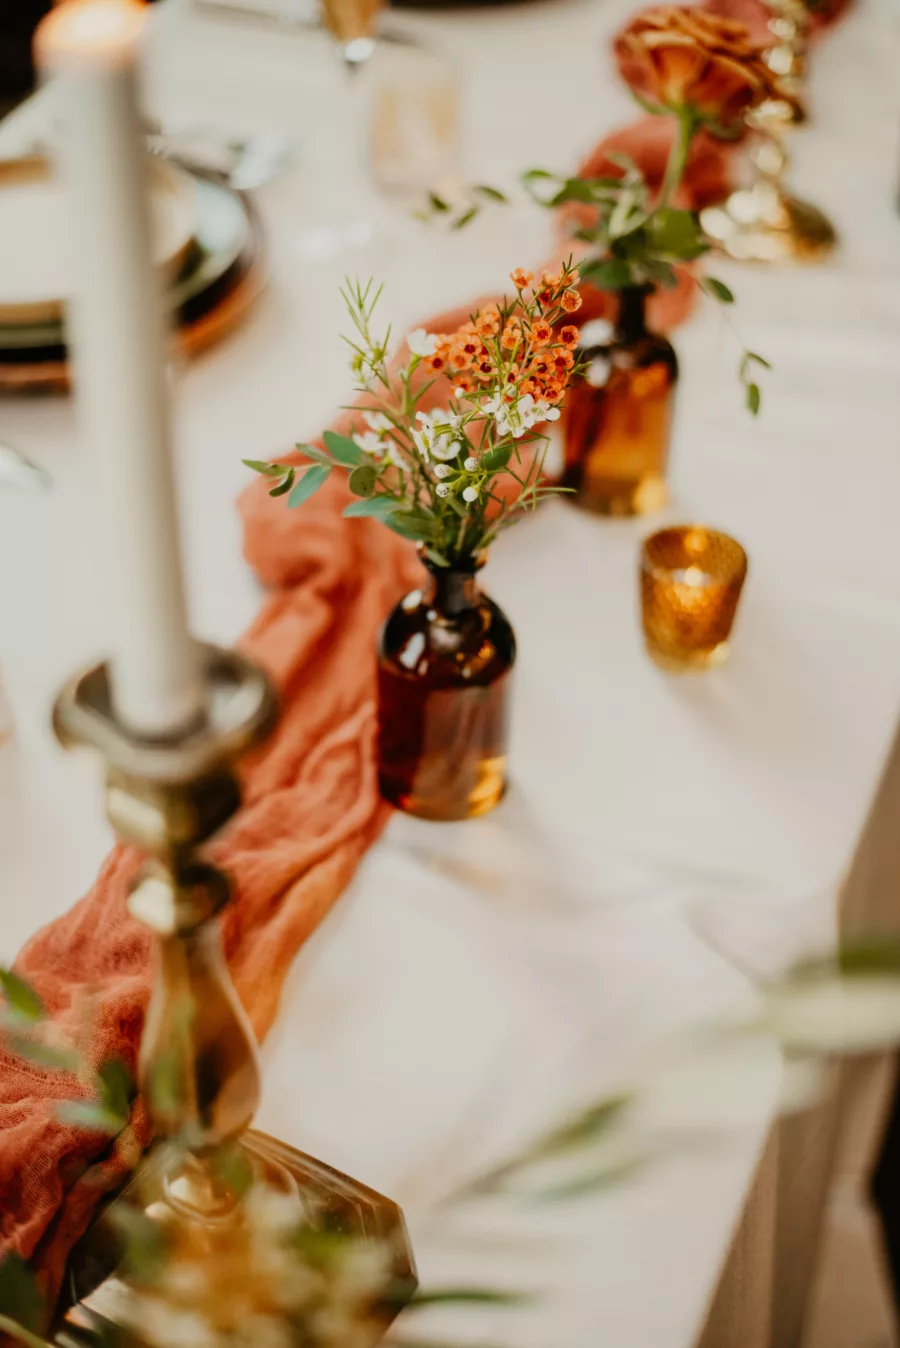 Boho Wedding Reception Centerpiece Ideas | Terracotta Cheescloth | Amber Bud Vases with Orange and White Alyssum | White Taper Candles